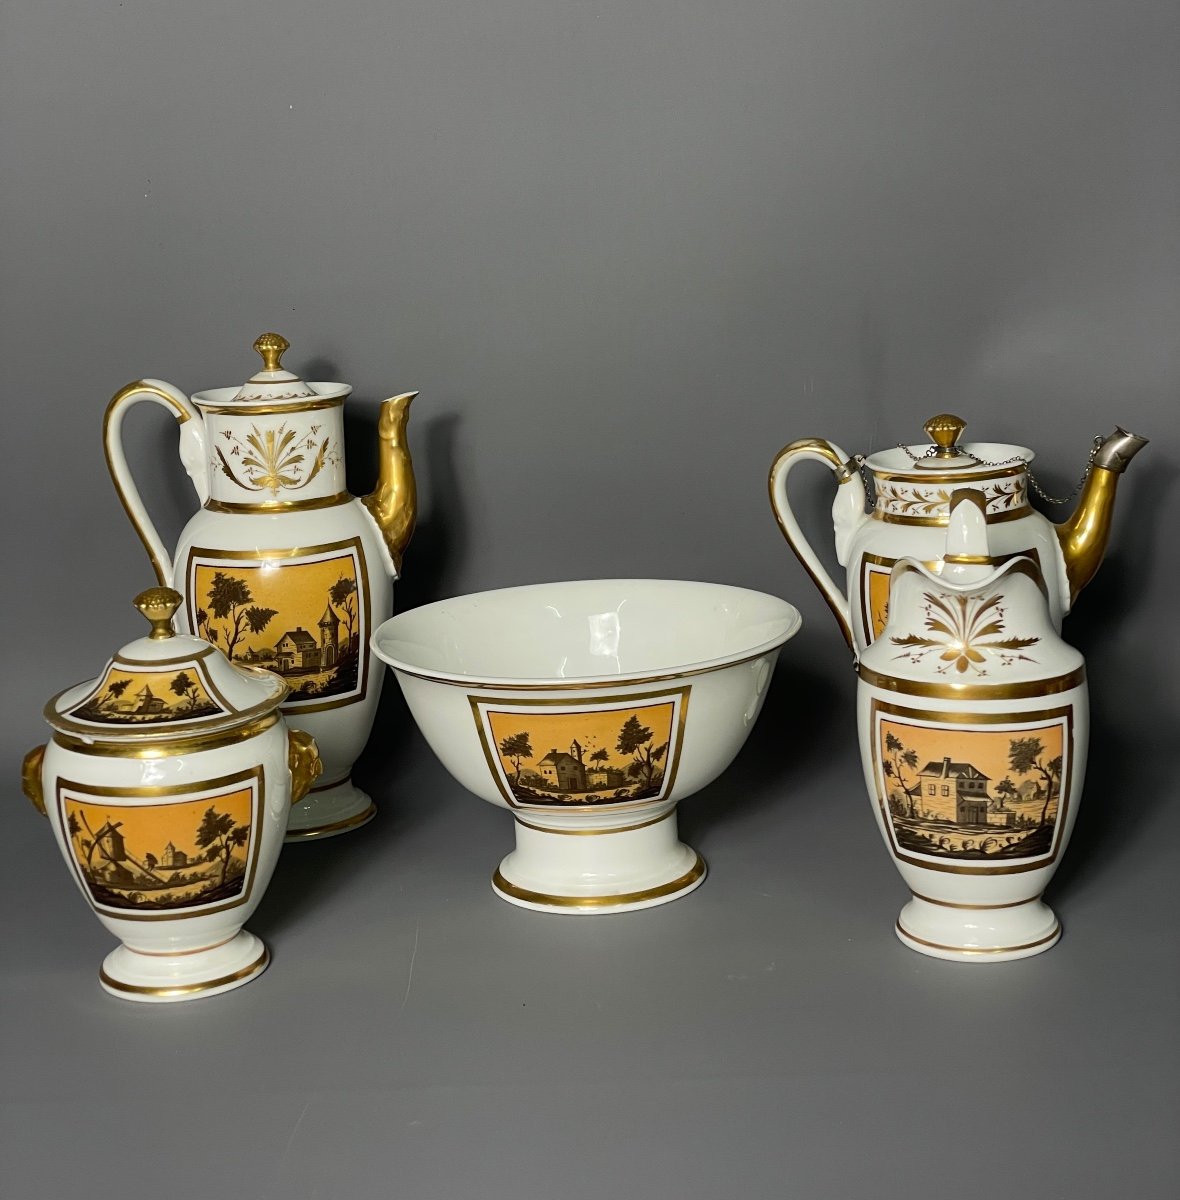 Coffee Service Was From The Empire Period In Porcelain -photo-2